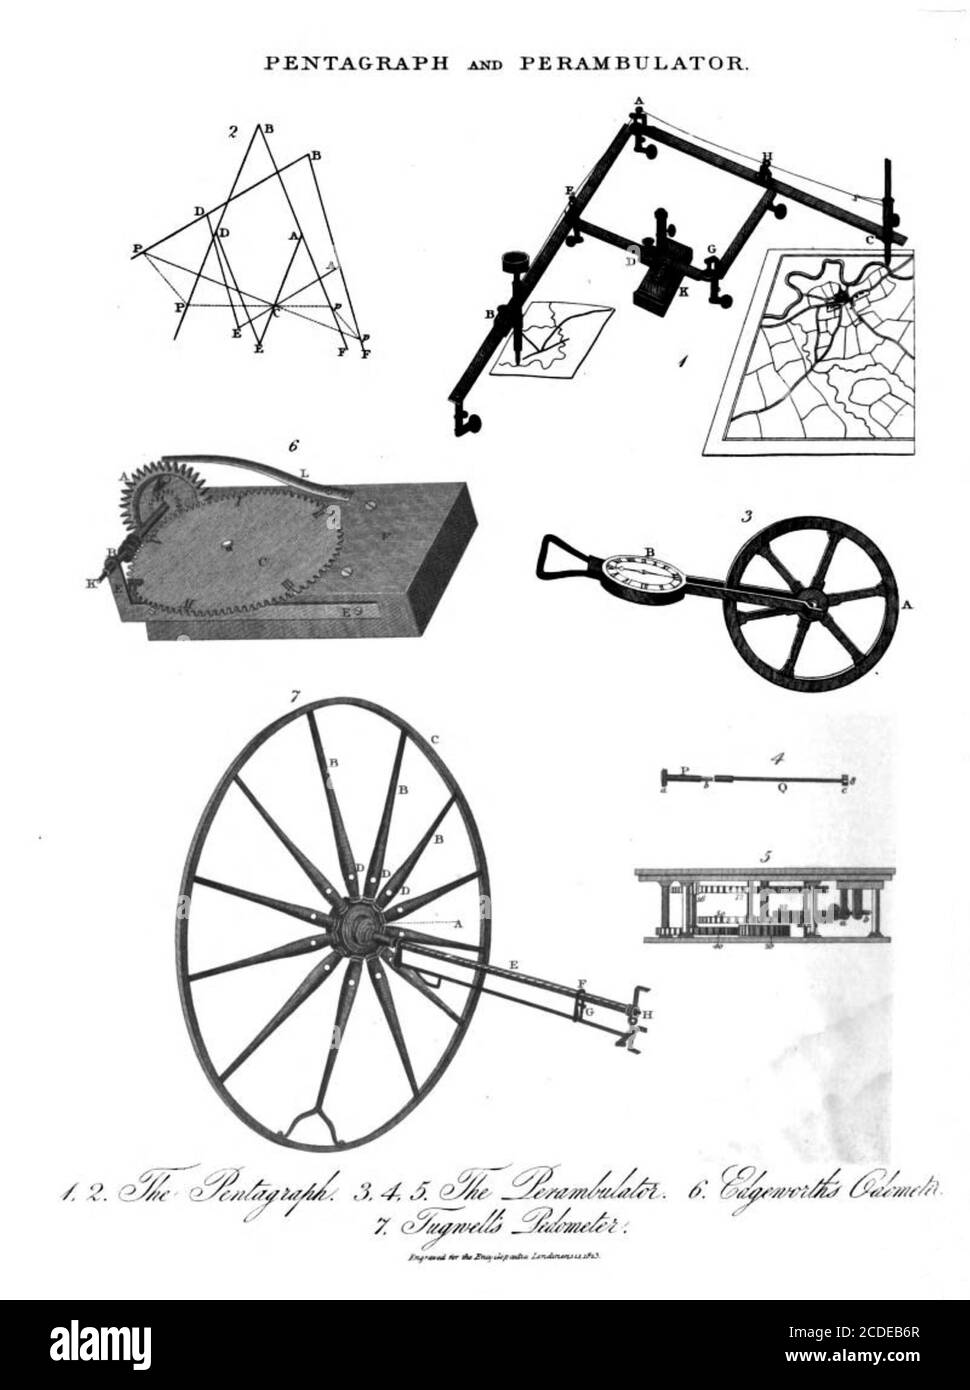 Pentagraph [Actually a Pantograph] and Perambulator - Surveyor's wheel (A pantograph is a mechanical linkage connected in a manner based on parallelograms so that the movement of one pen, in tracing an image, produces identical movements in a second pen) Copperplate engraving From the Encyclopaedia Londinensis or, Universal dictionary of arts, sciences, and literature; Volume XIX;  Edited by Wilkes, John. Published in London in 1823 Stock Photo